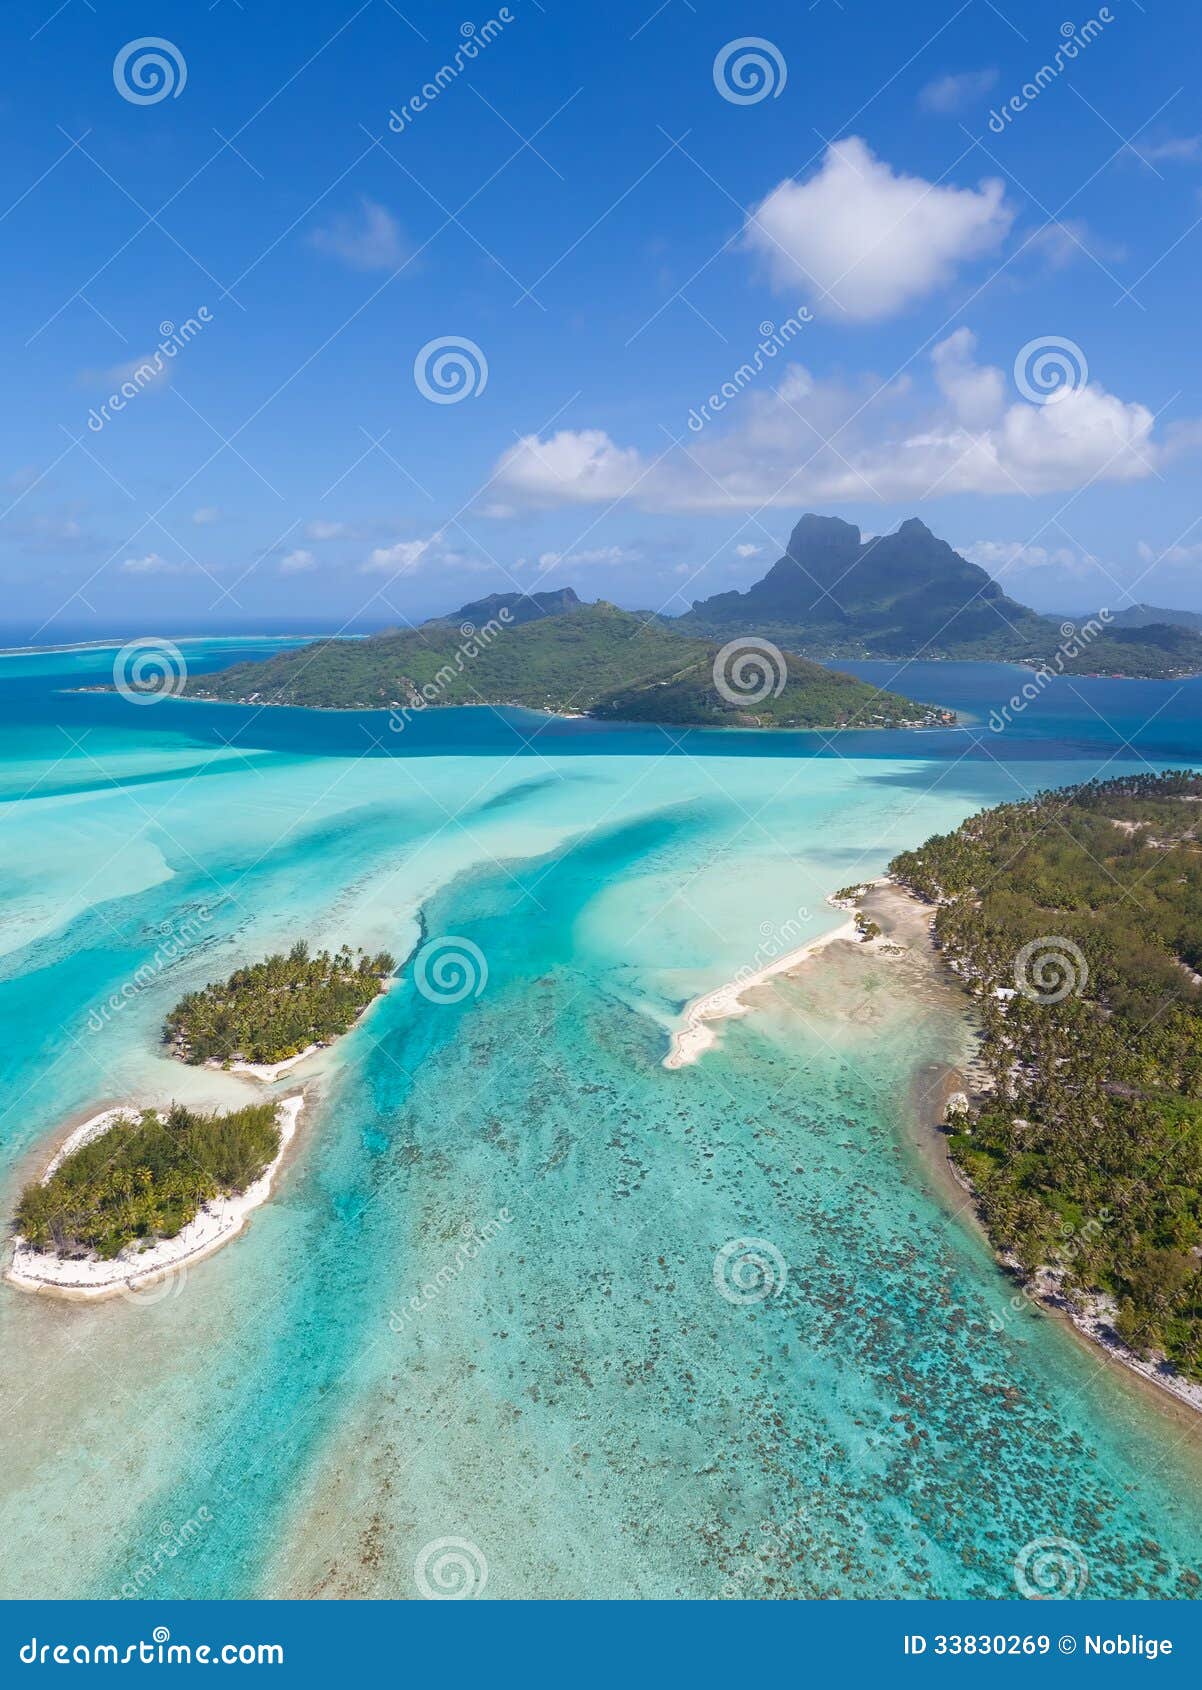 bora bora from helicopter